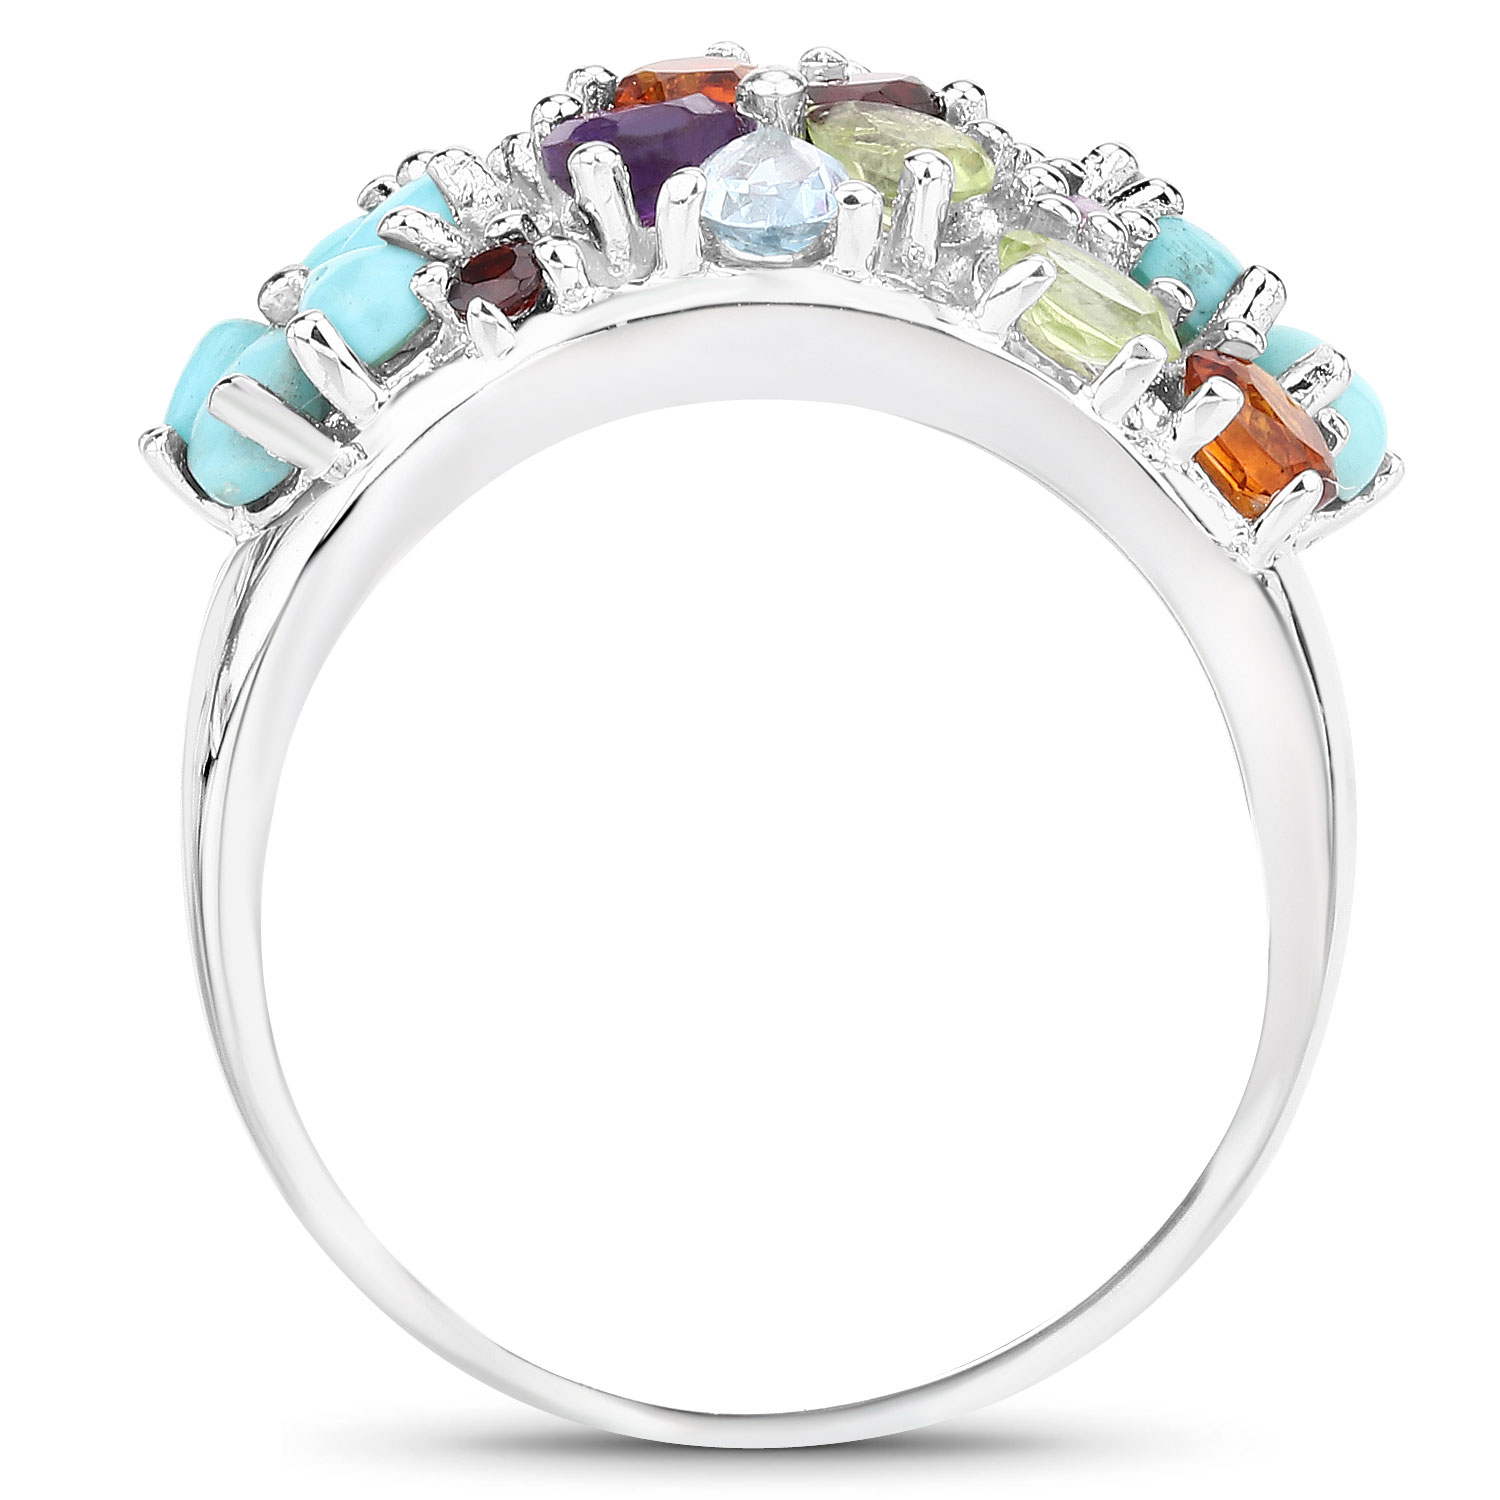 925 STERLING SILVER LADIES OVAL HALO RING W/ 1.50 CTS OPAL/DIAMONDS/SIZE 5-9